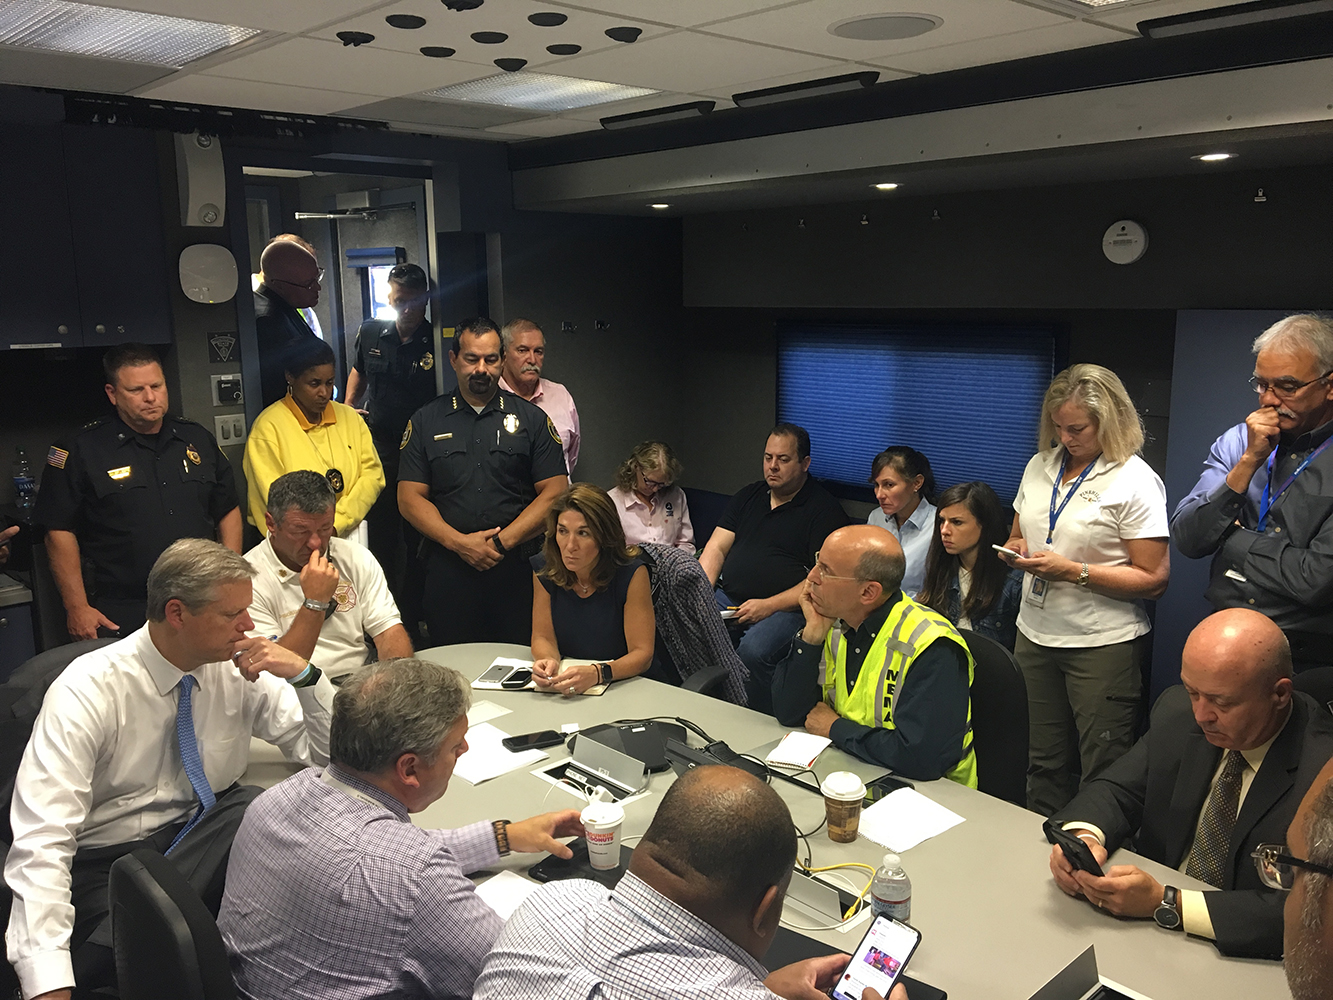 A group of Boston leads meeting with each other for crisis response